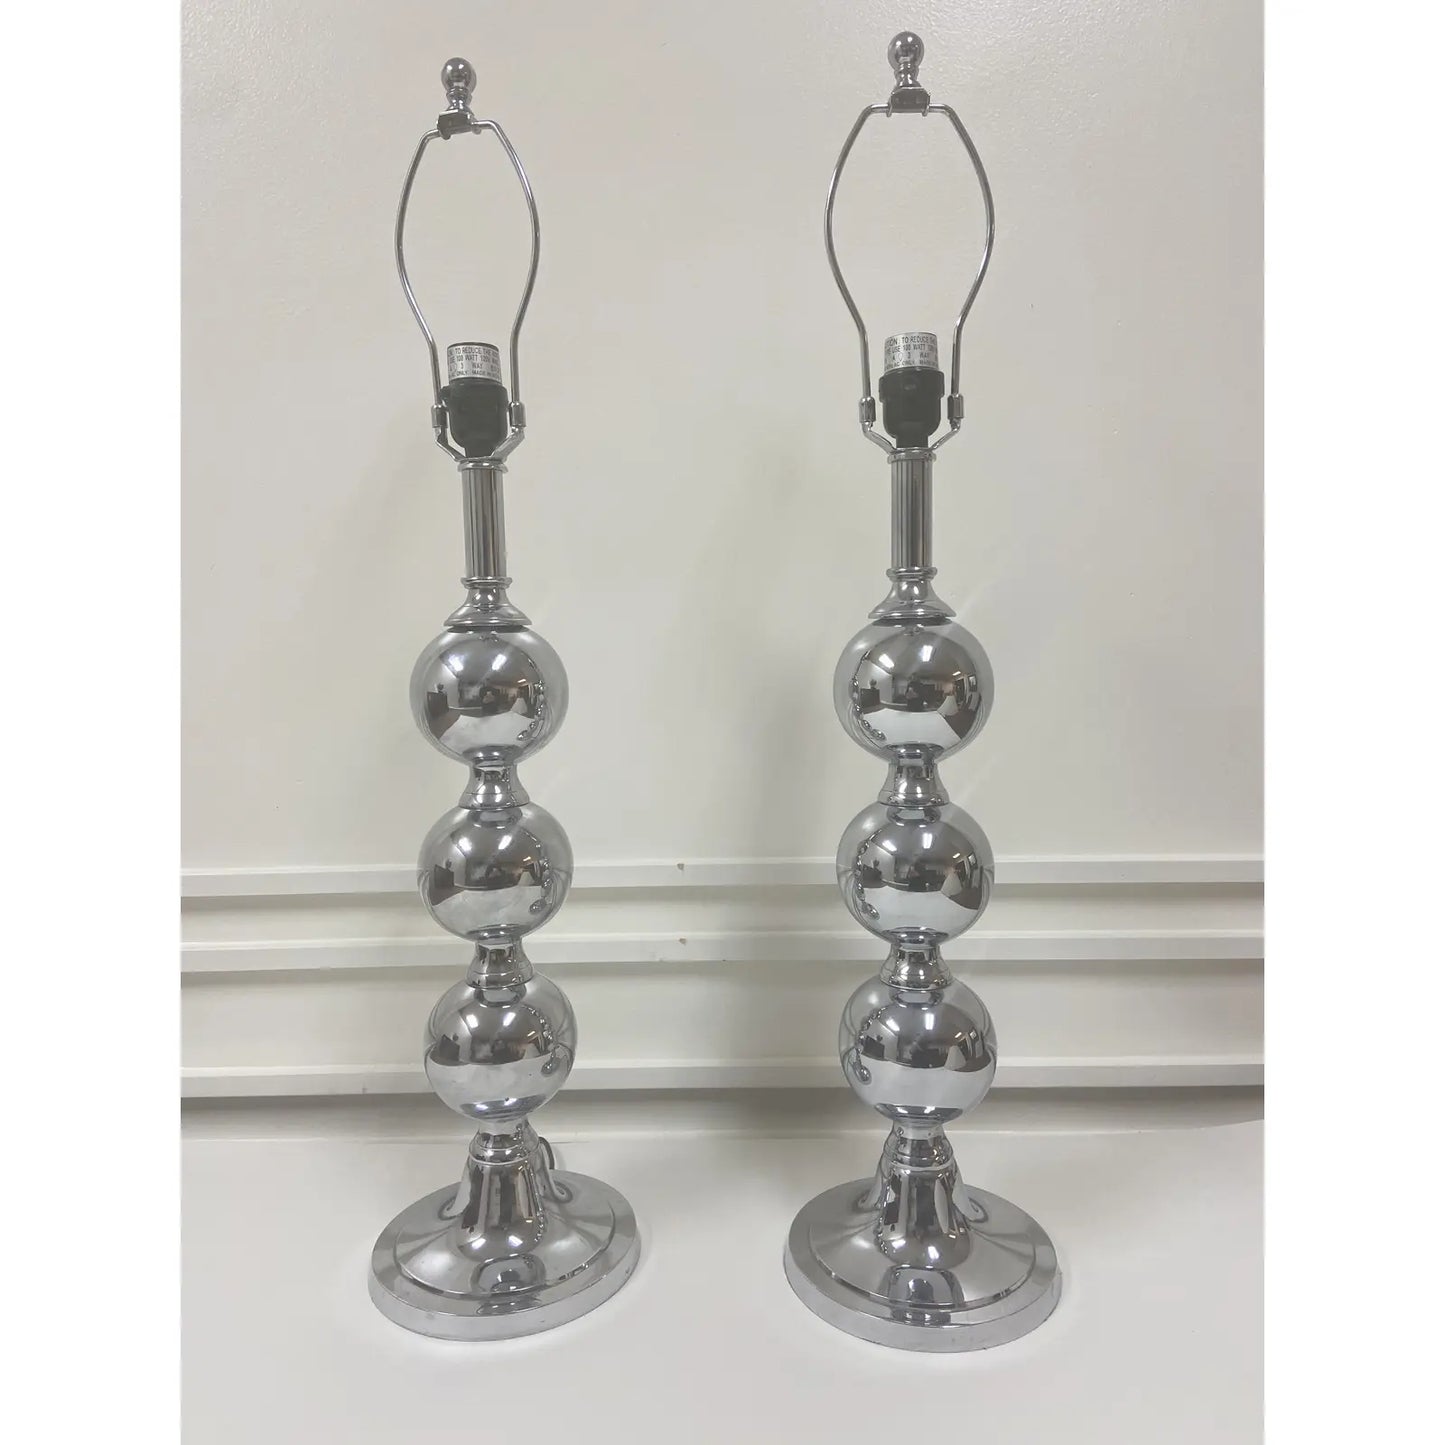 MODERNIST CHROME STACKED BALL LAMPS - PAIR